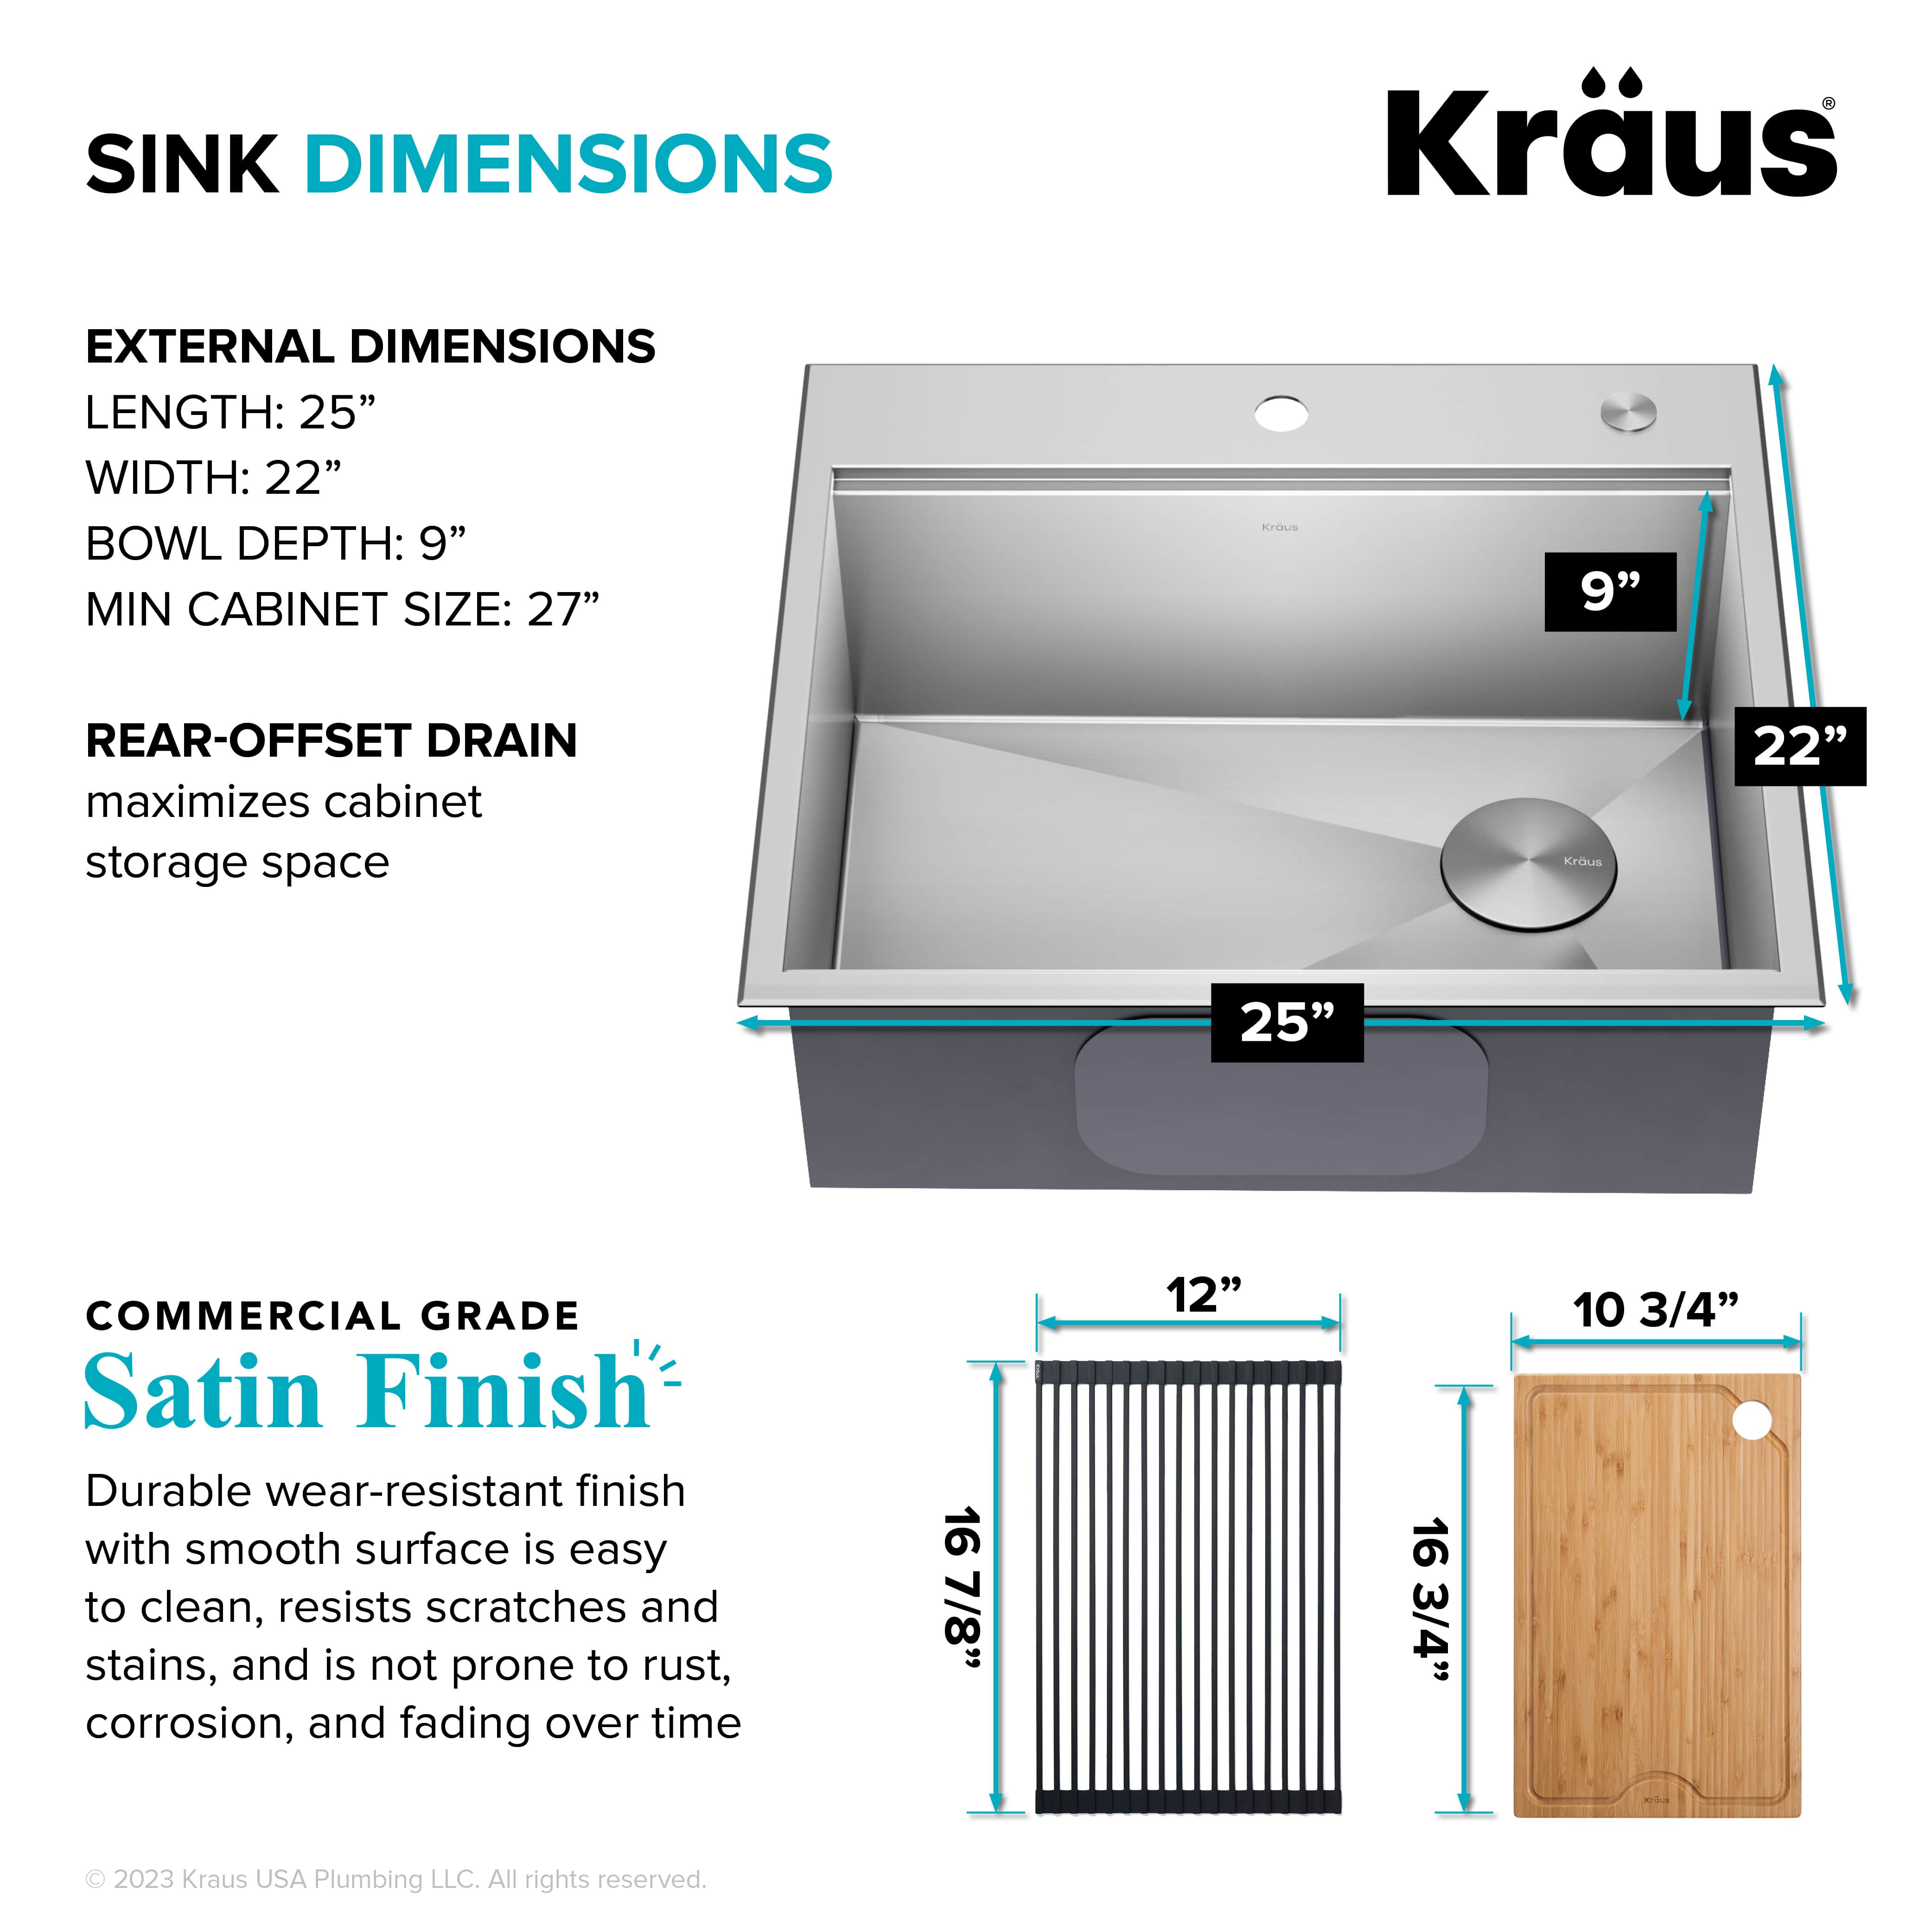 Kraus Kore Workstation 25-inch Drop-In or Undermount 16 Gauge Single Bowl  Stainless Steel Kitchen Sink with Accessories (Pack of 5)